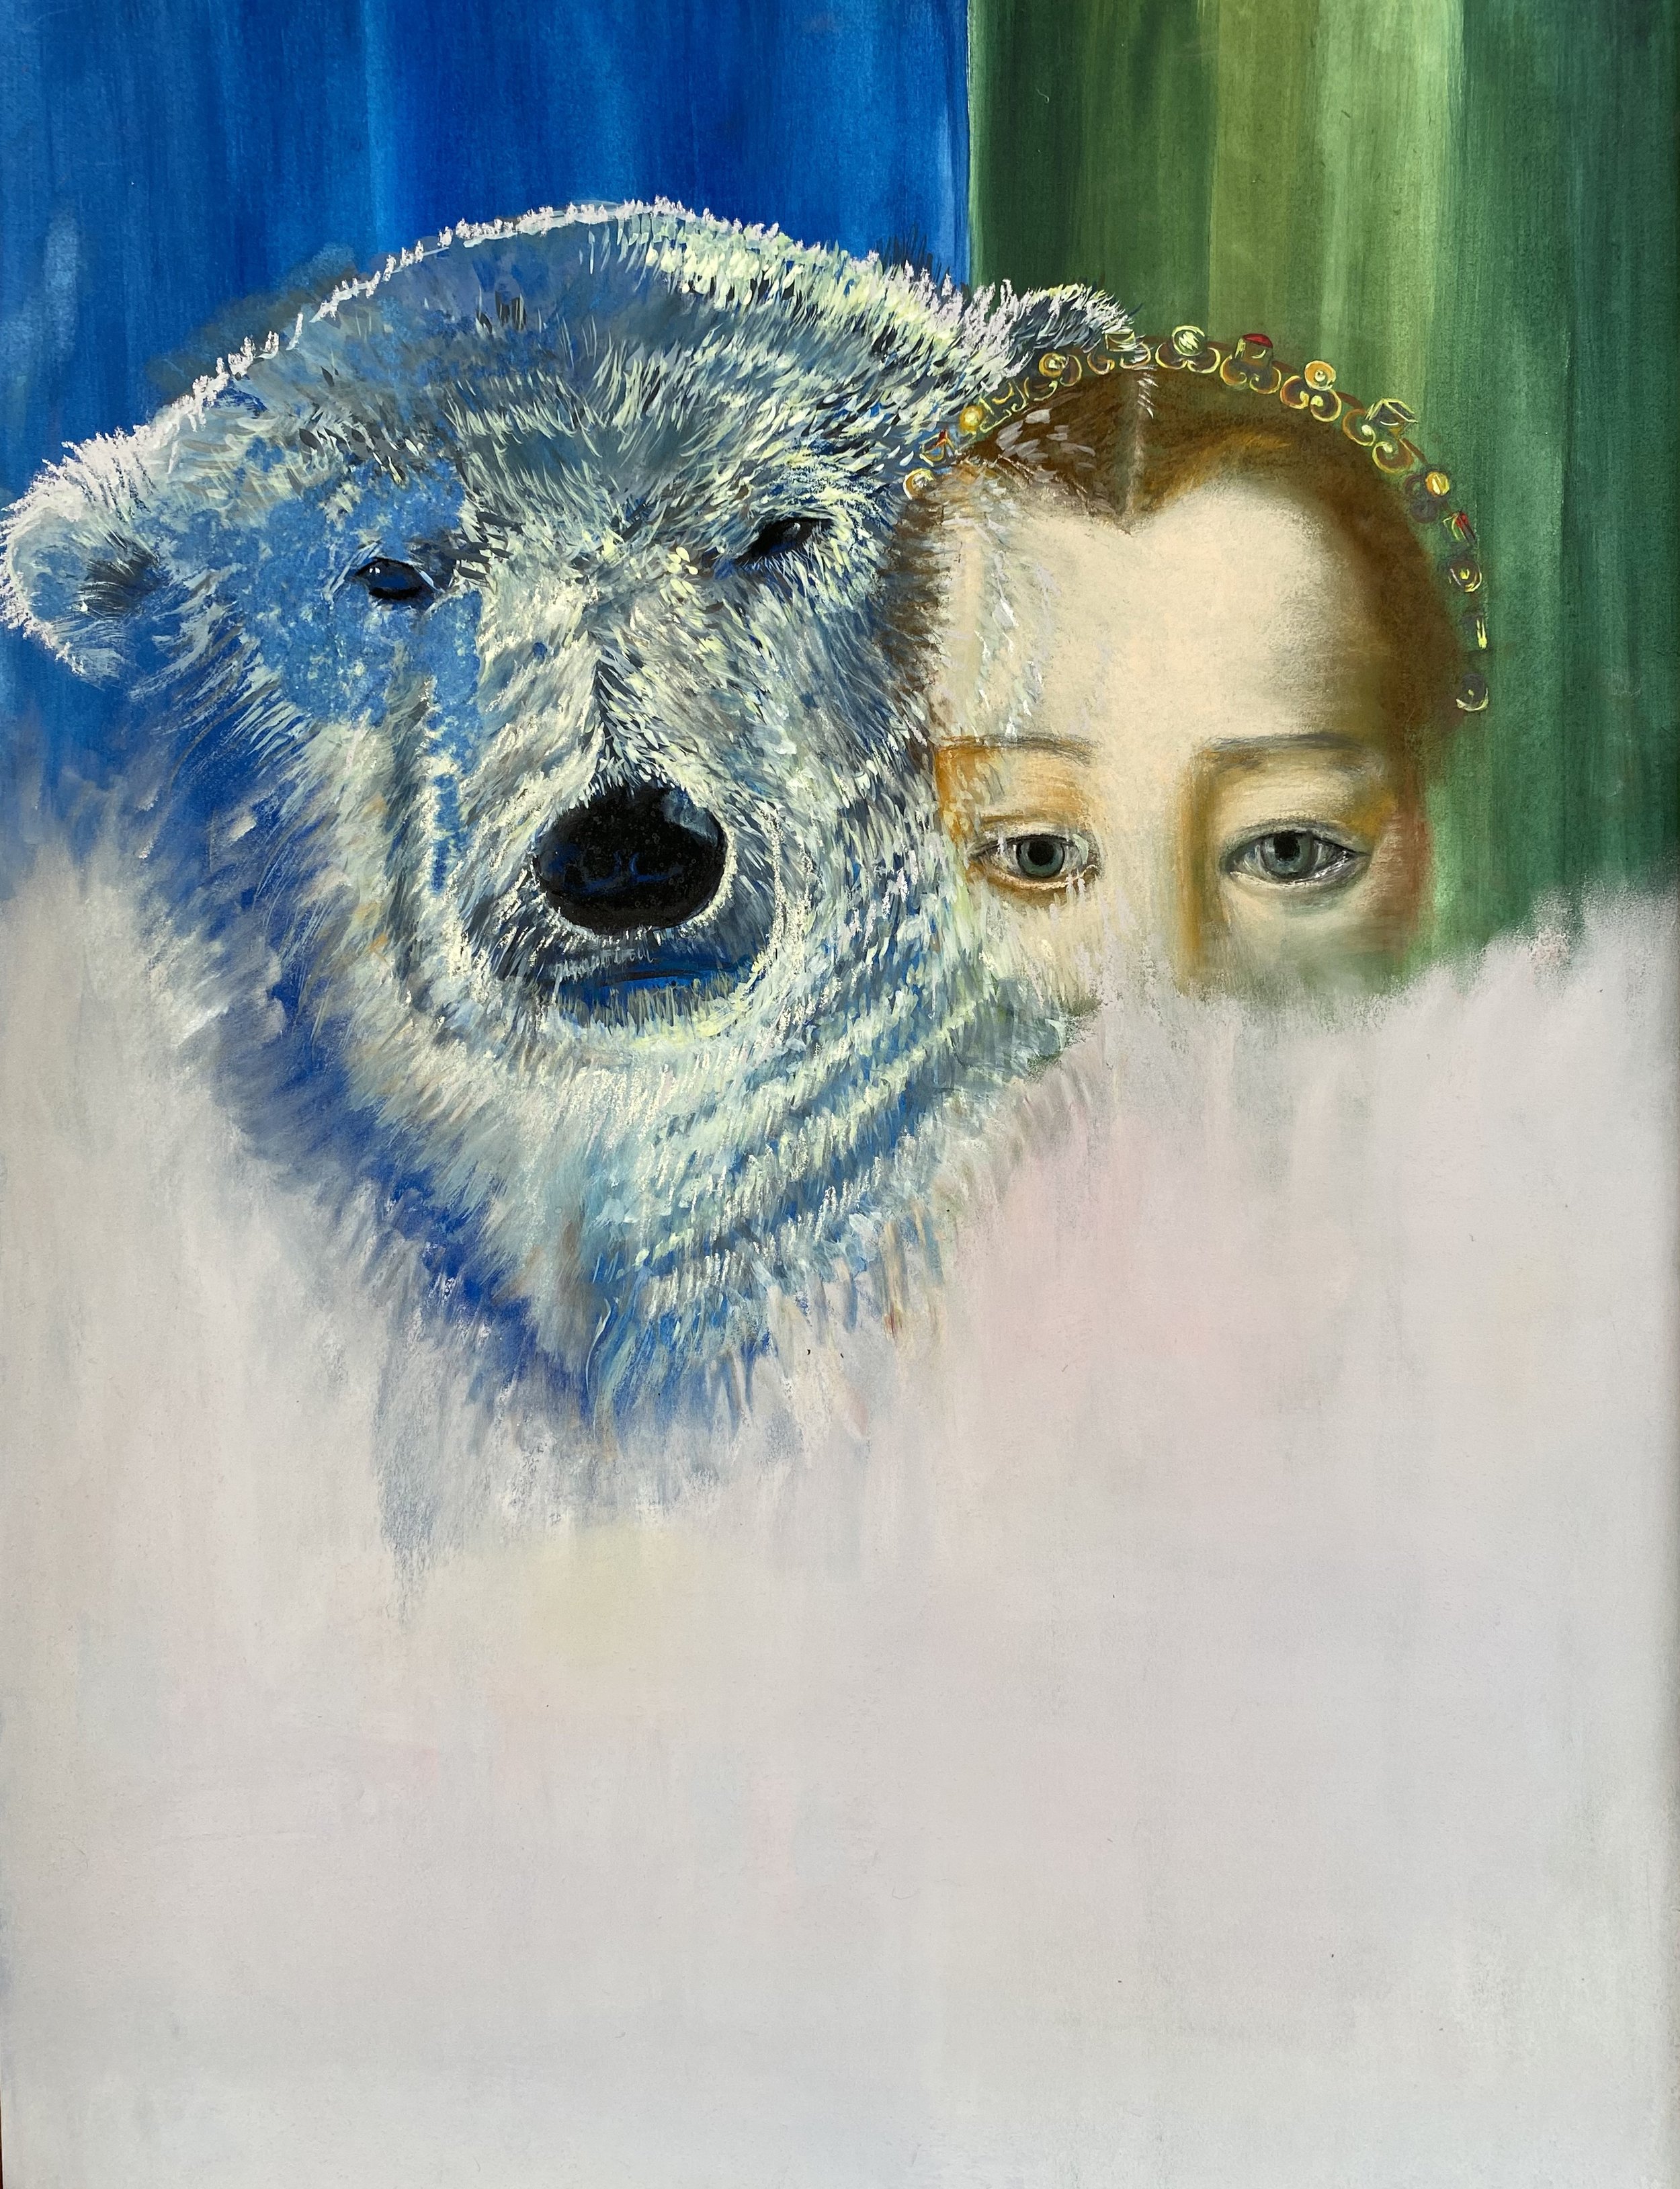    Study from Aurora Imbued Mother Bear Shepherds Maria de Medici’s Young Transition    chalk pastel, watercolor and graphite on paper  18 x 24 inches  2023  &nbsp;  I, polar bear, am laying on a white snowy plain. If you look closely in the clear ni